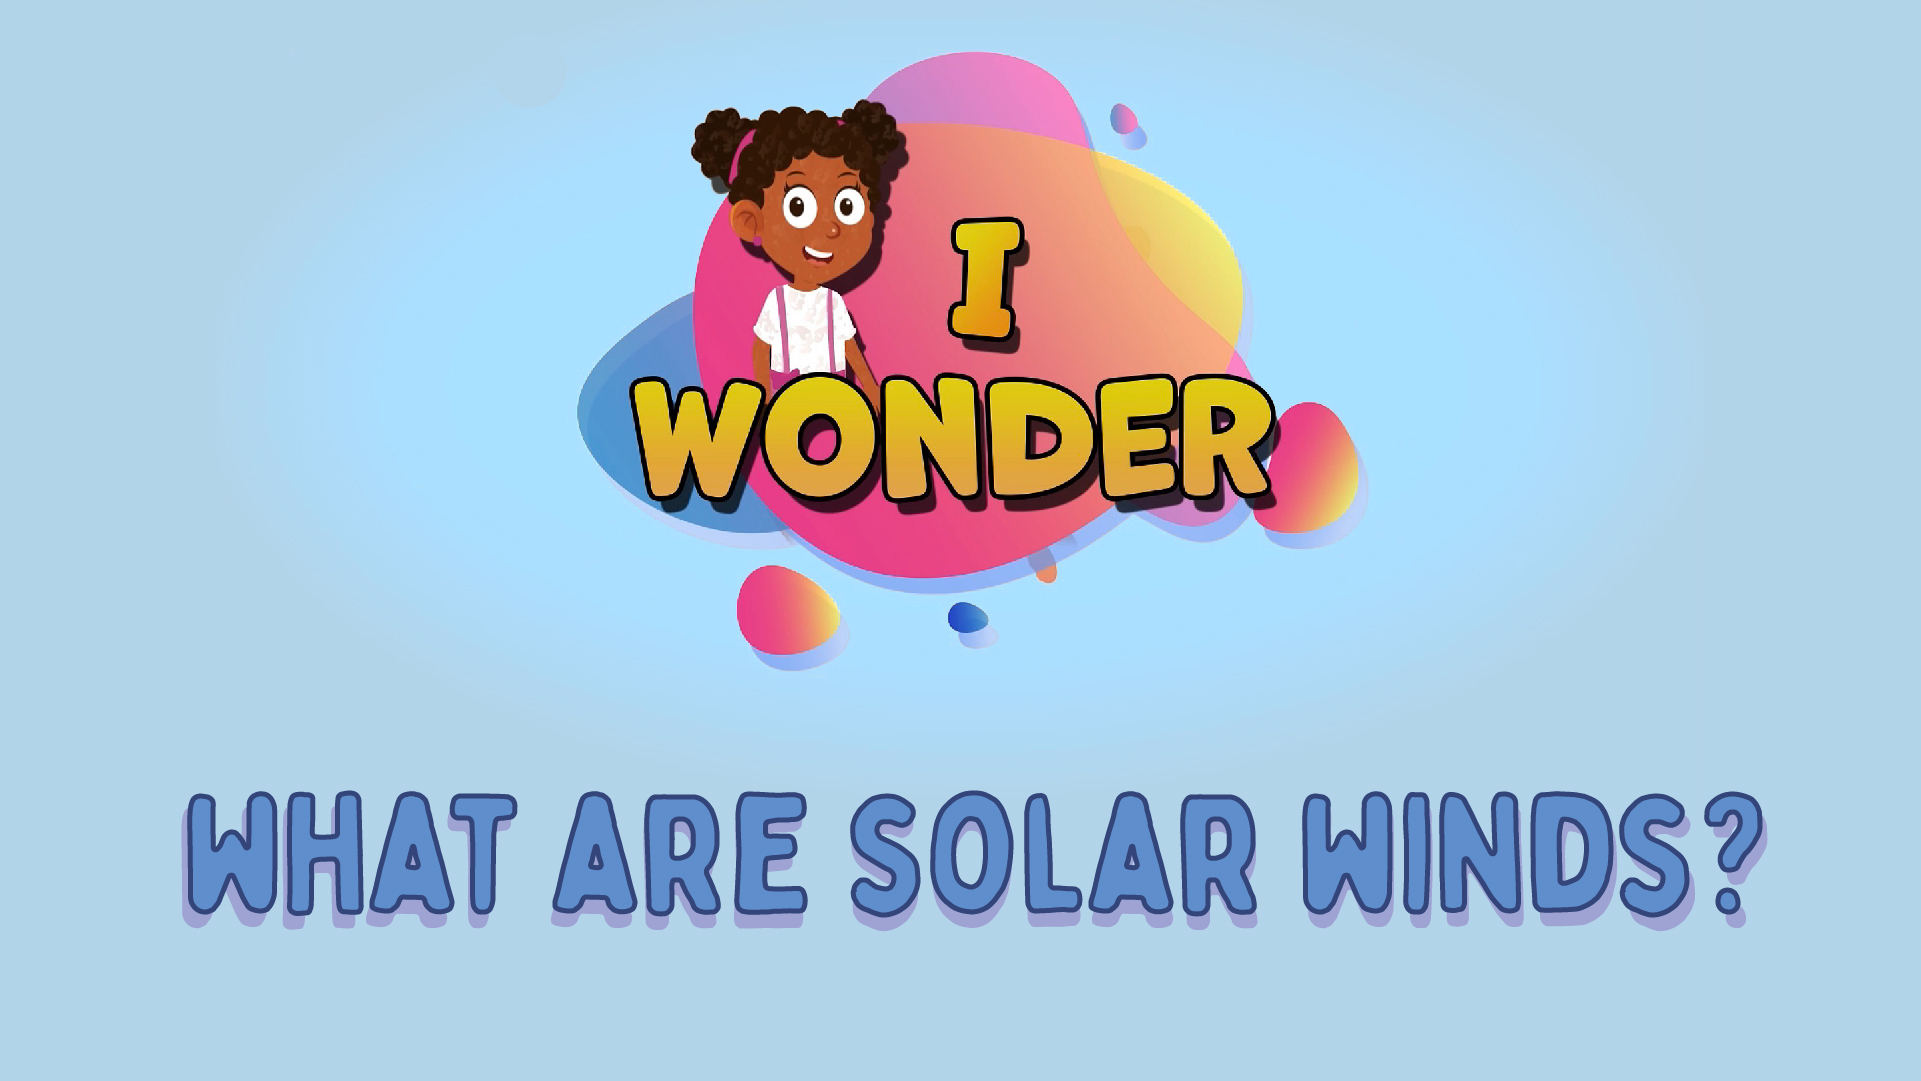 What Are Solar Winds?